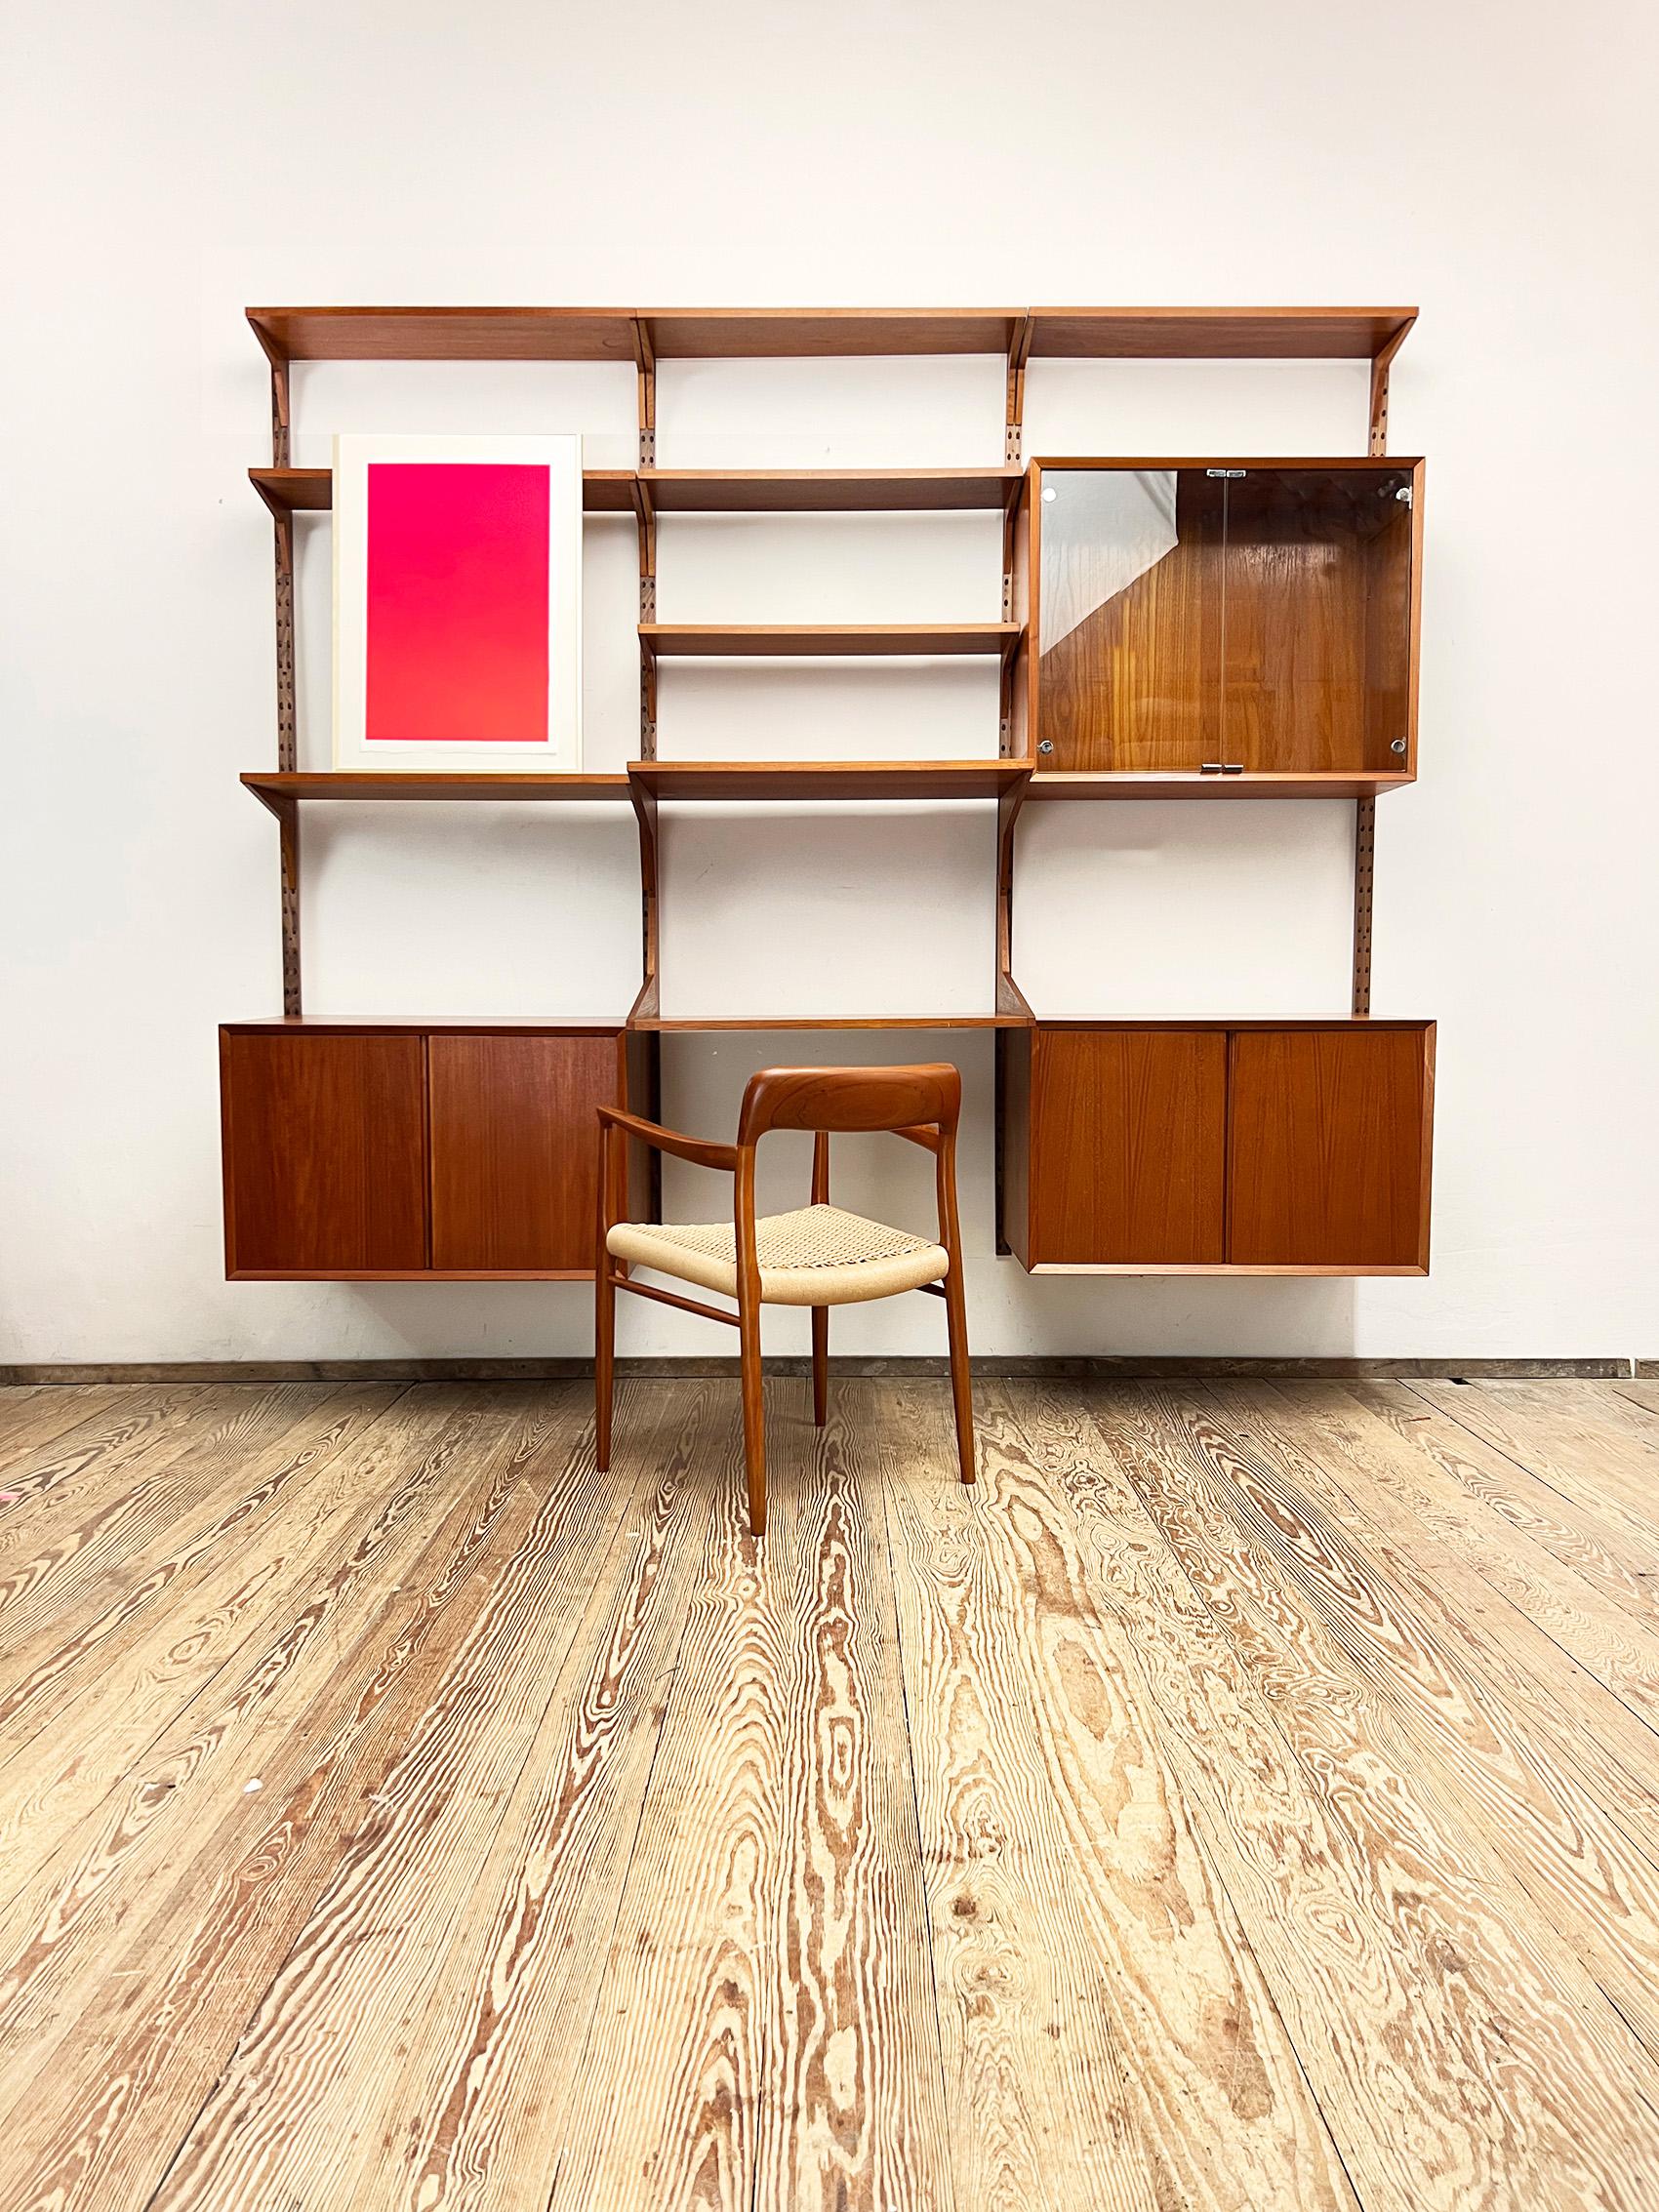 Dimensions (Width x Depth x Height) ca. 240 x 40 / 50 x 203 cm 

Elevate your living space with this vintage mid-midcentury modern Poul Cadovius Royal System Wall Unit, a true masterpiece of Scandinavian design. Crafted by the iconic Danish designer